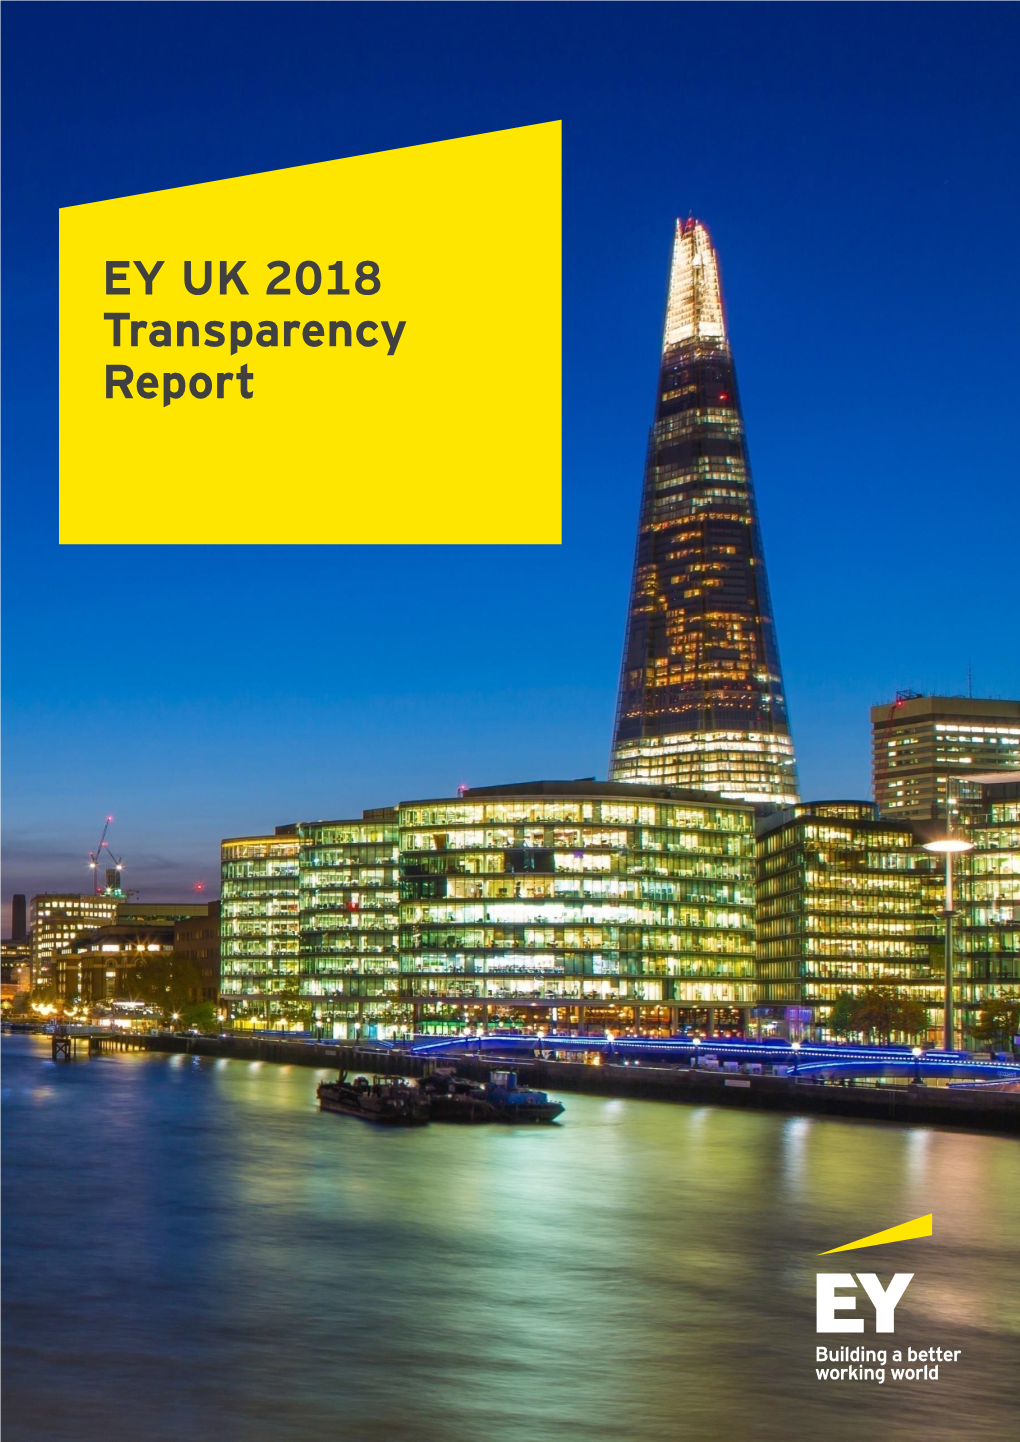 EY UK 2018 Transparency Report